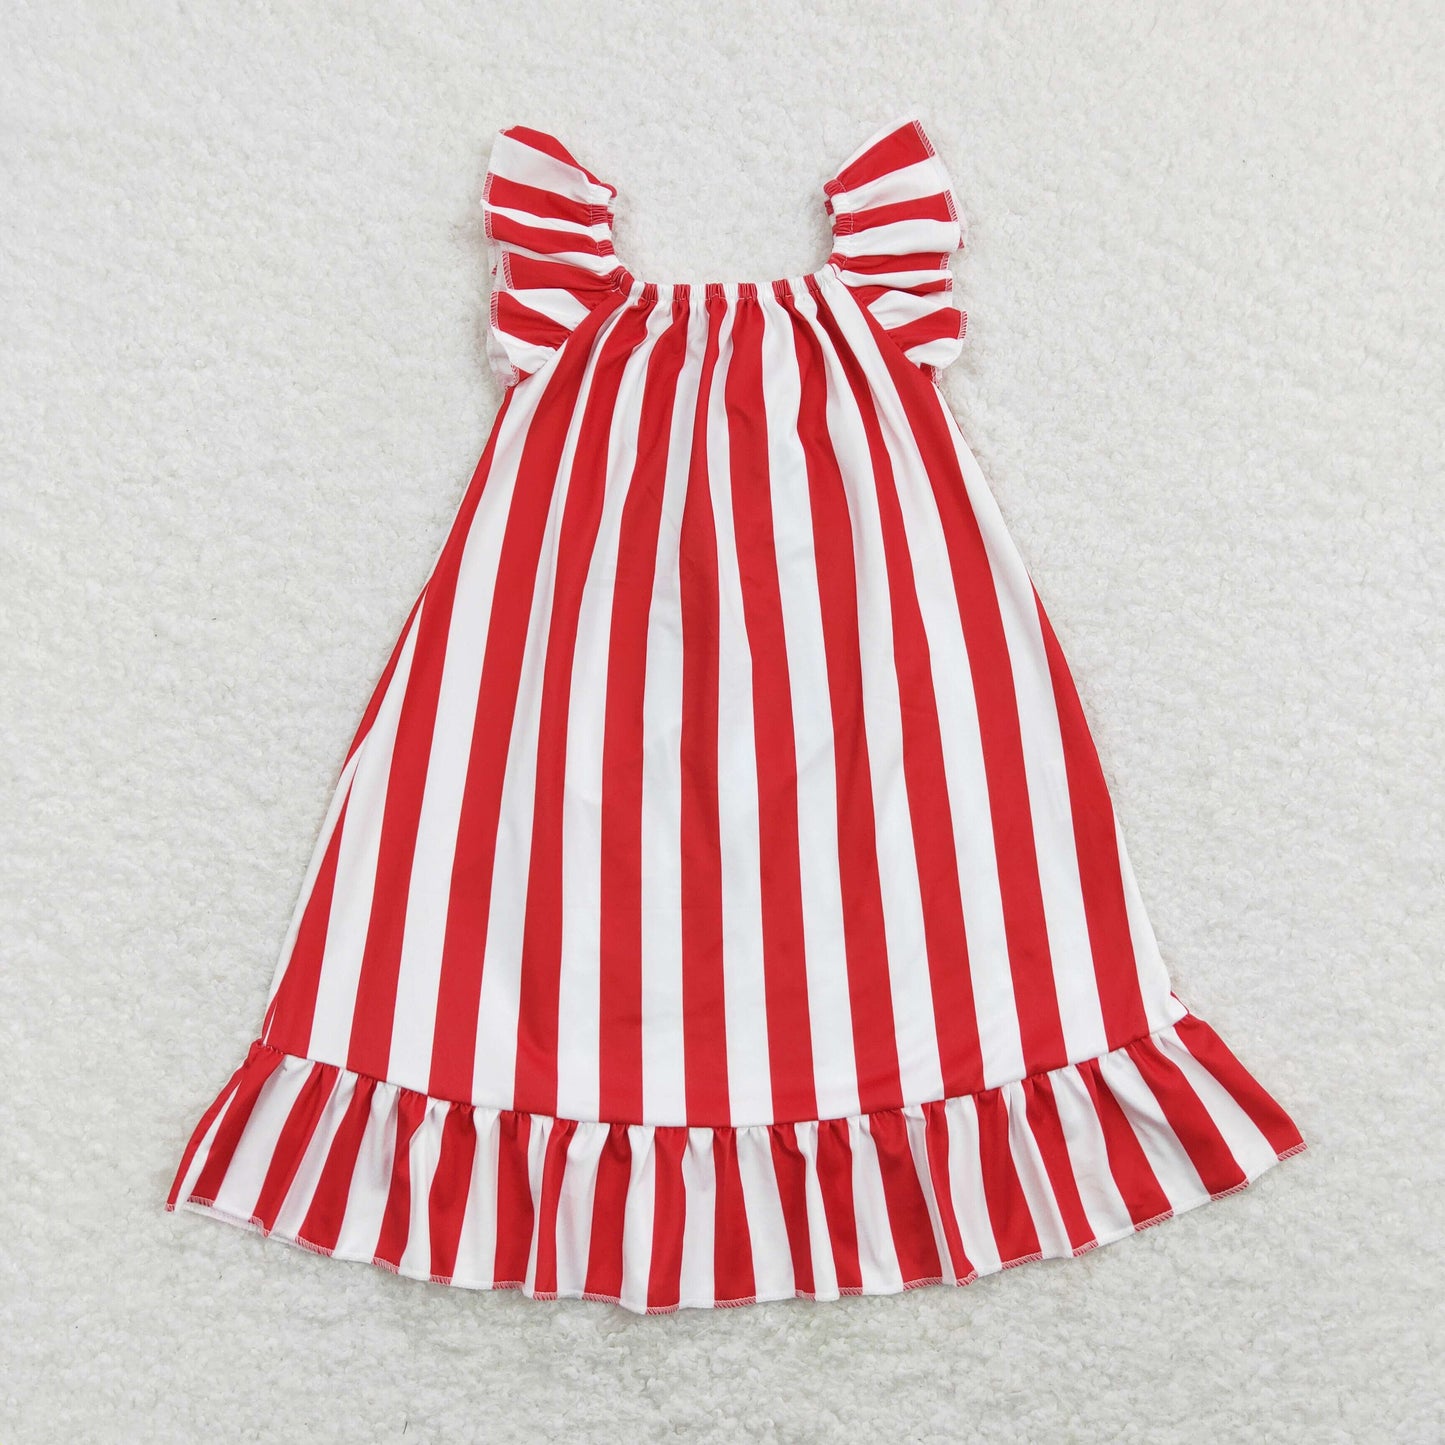 Kids July 4th Red Striped Dress With Bow